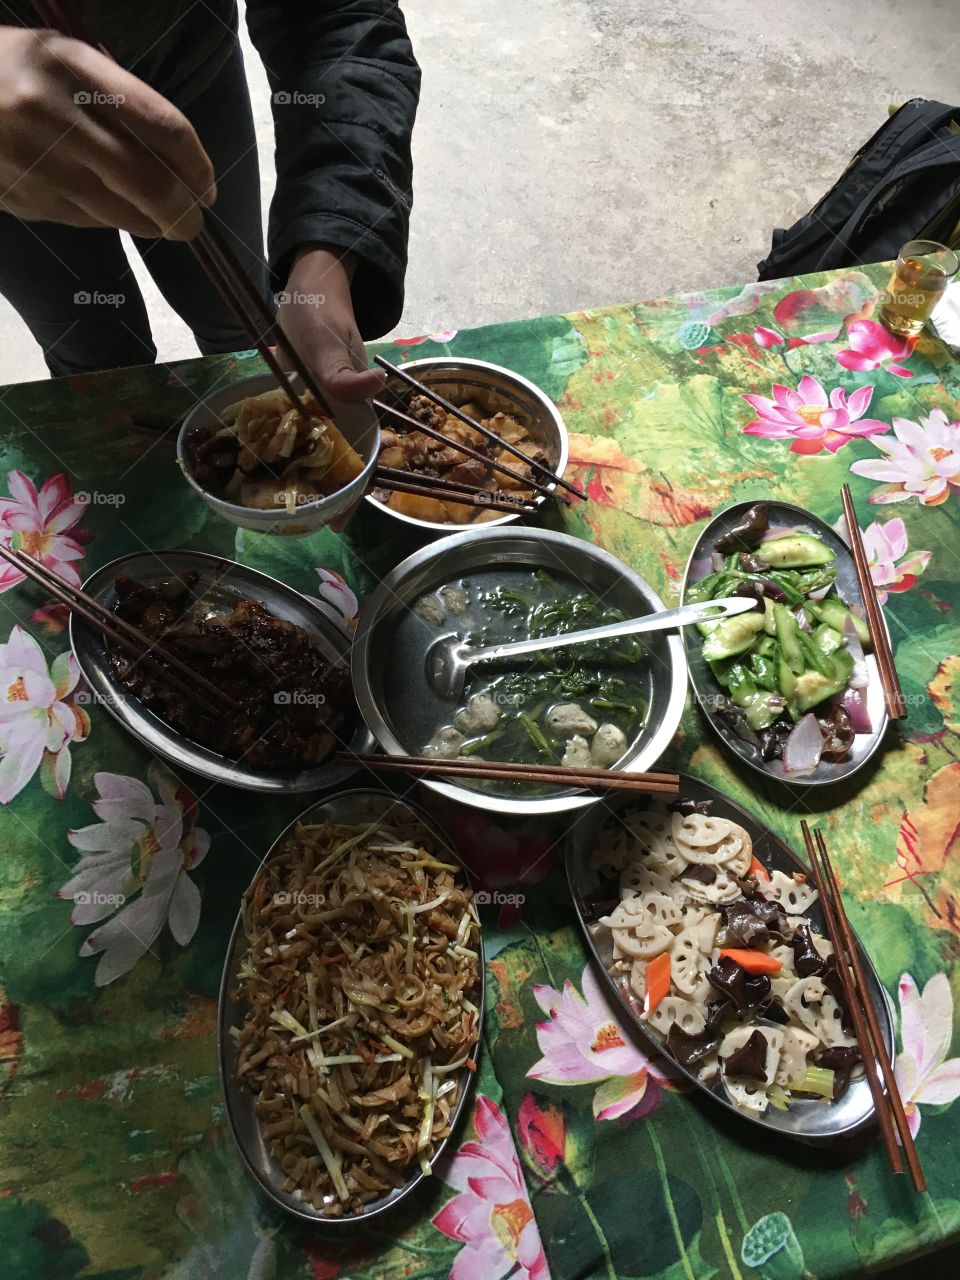 Family style lunch in southern China